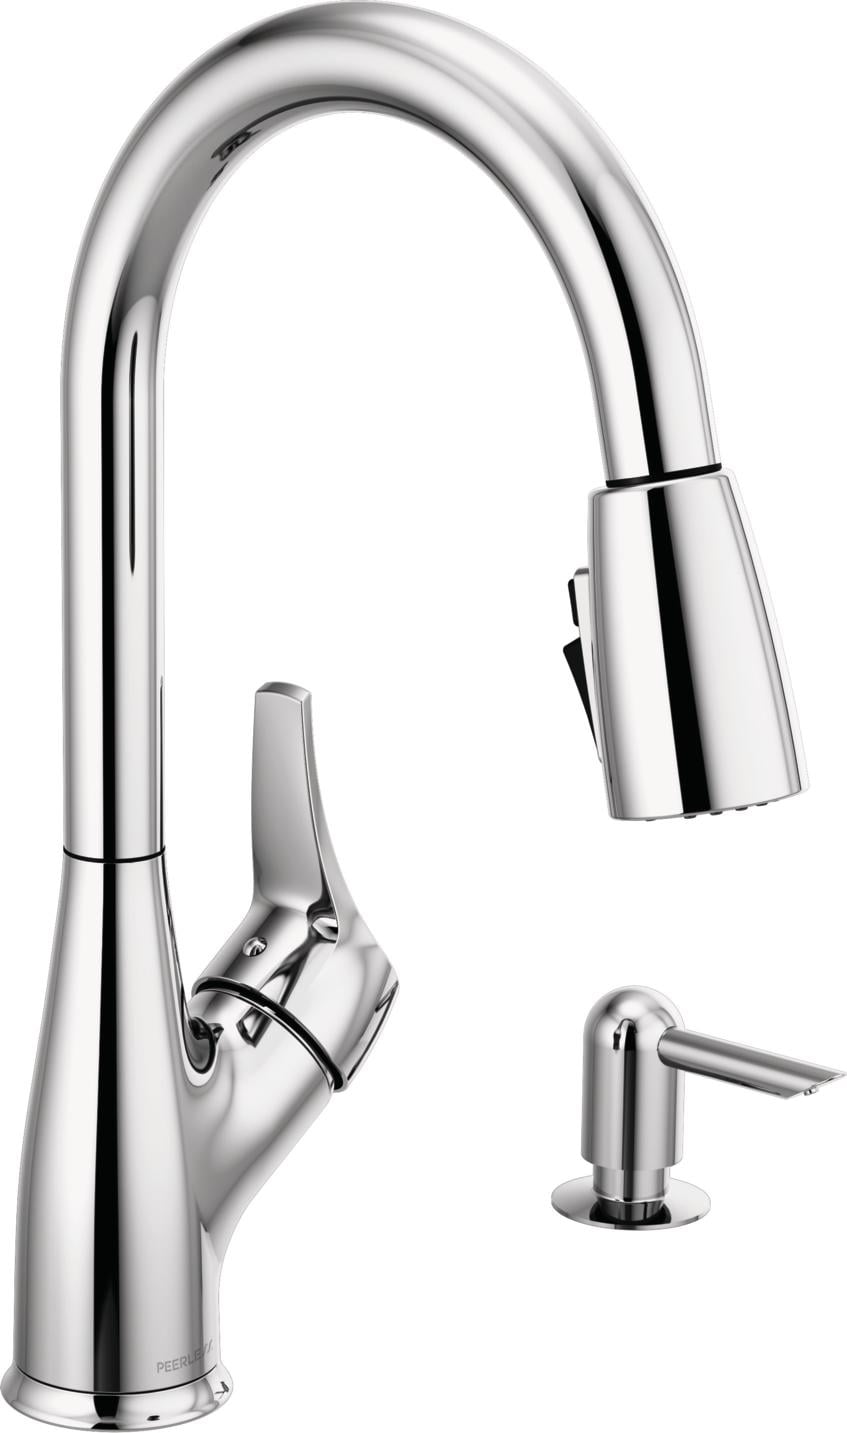 Peerless Apex Single Handle Pull-Down Sprayer Kitchen Faucet with Soap Dispenser in Chrome P7901LF-SD-W